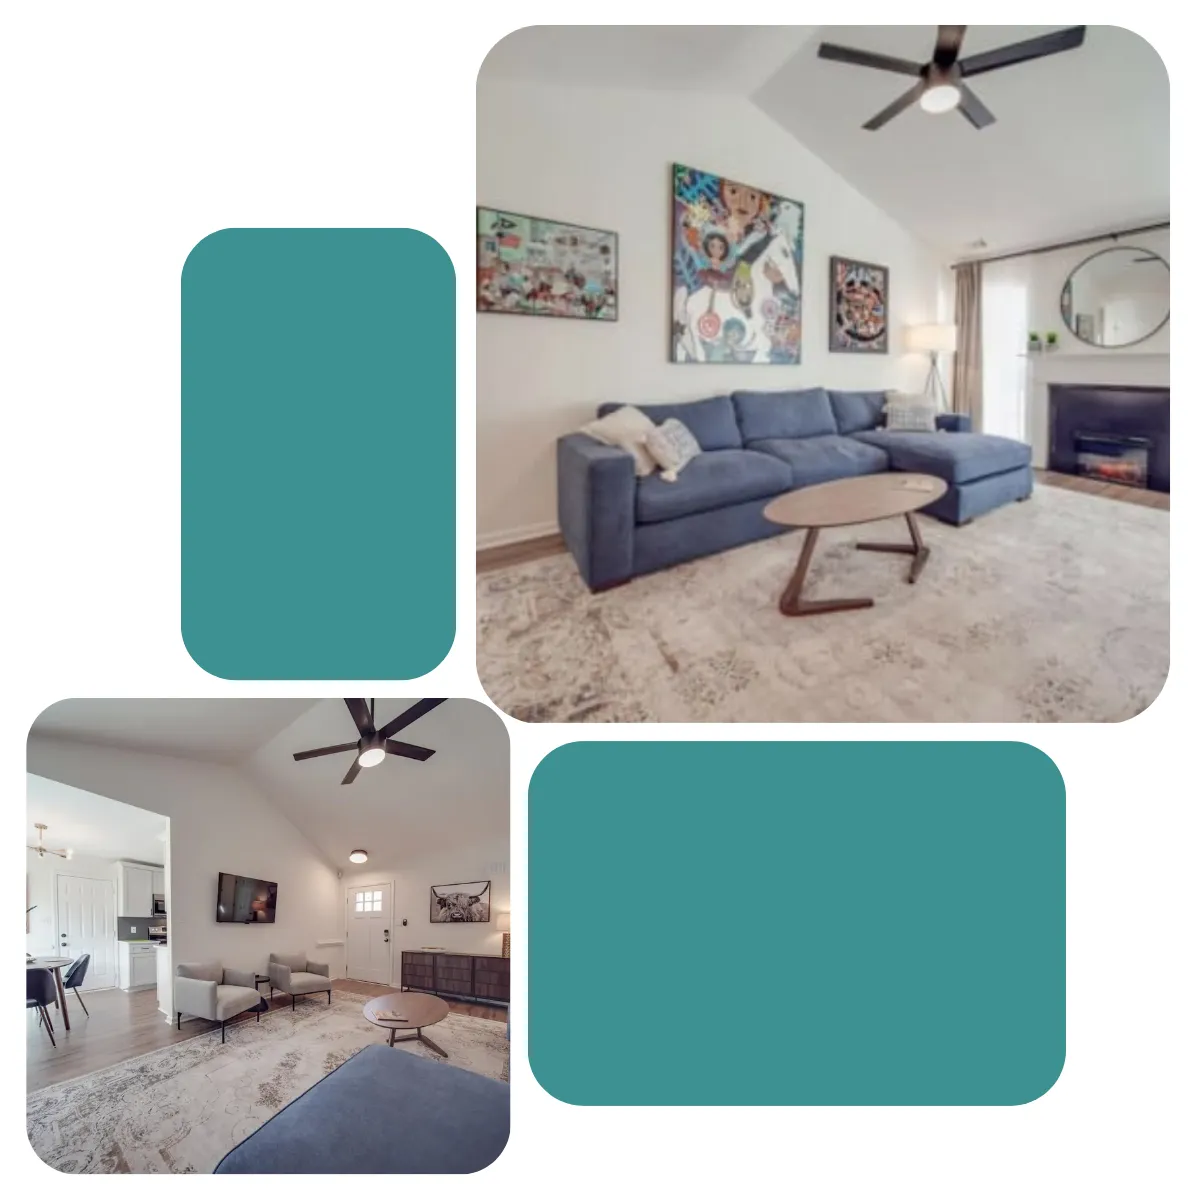 Experience the comfort of a Cozy Ranch Home with 3 bedrooms, 2 baths, vaulted ceilings, new appliances, LVP flooring, fixtures, and freshly painted walls—all brand new.